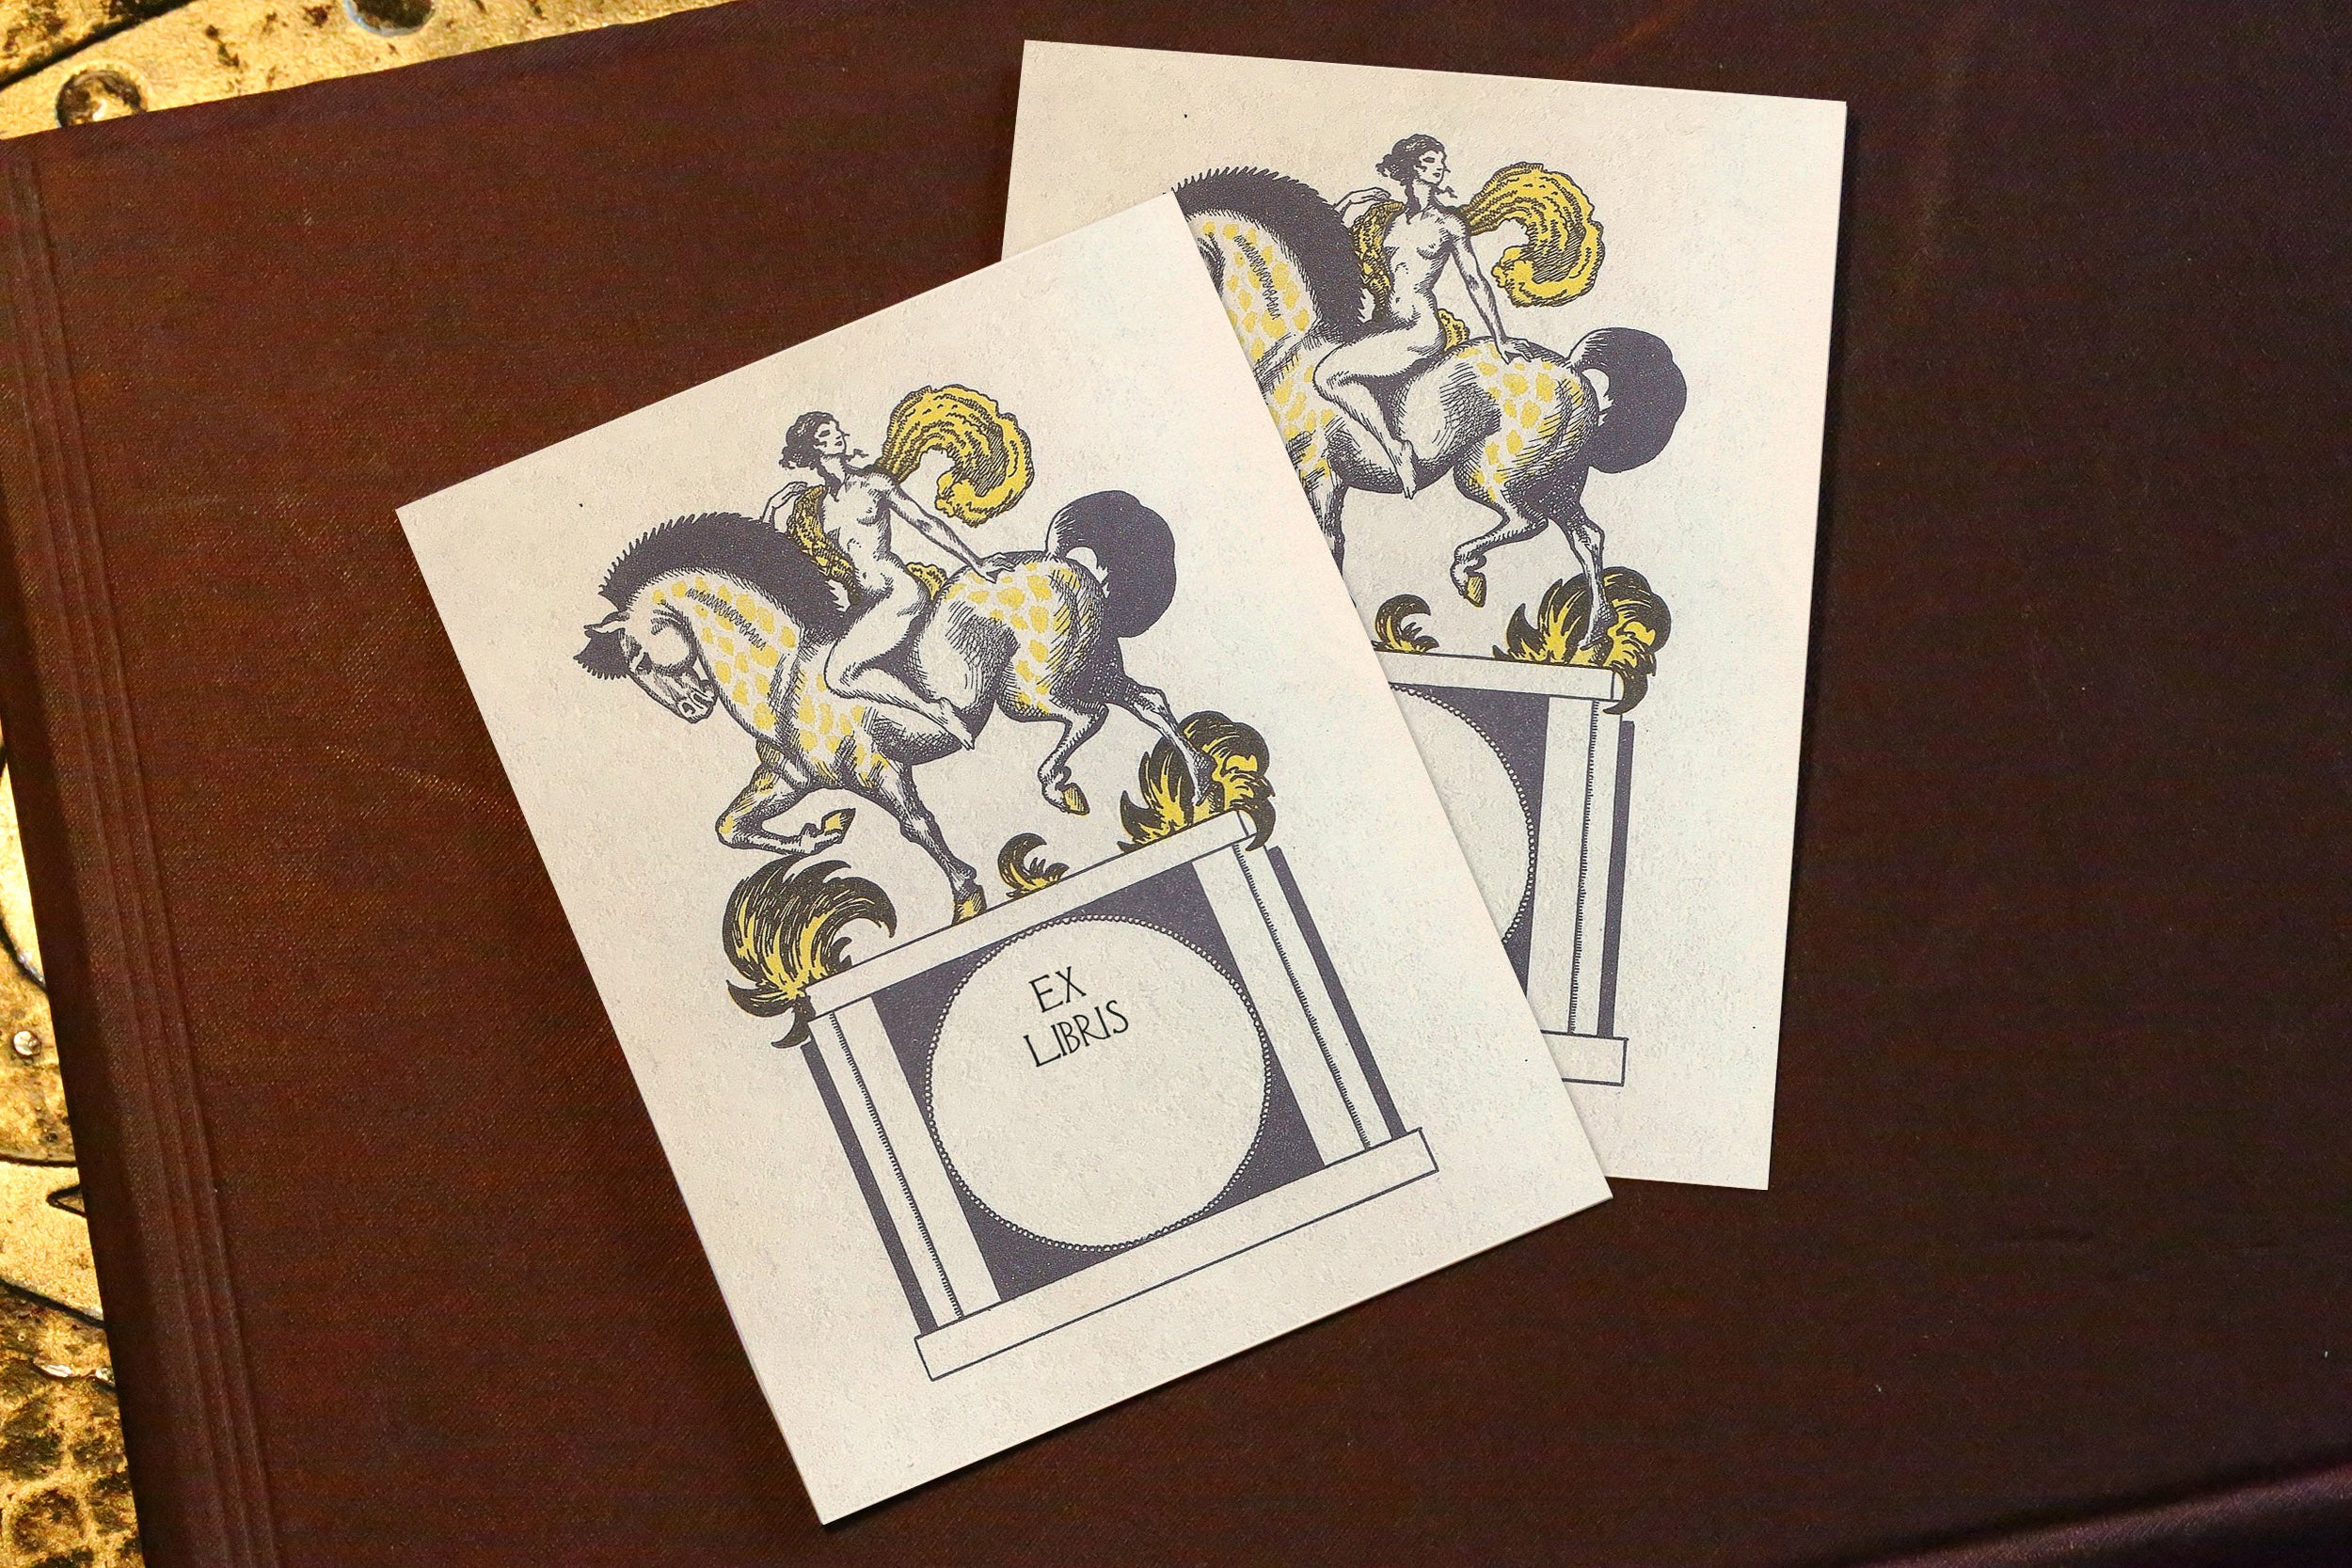 Bareback Horse Rider, Erotic Personalized Gothic Ex-Libris Bookplates, Crafted on Traditional Gummed Paper, 3in x 4in, Set of 30